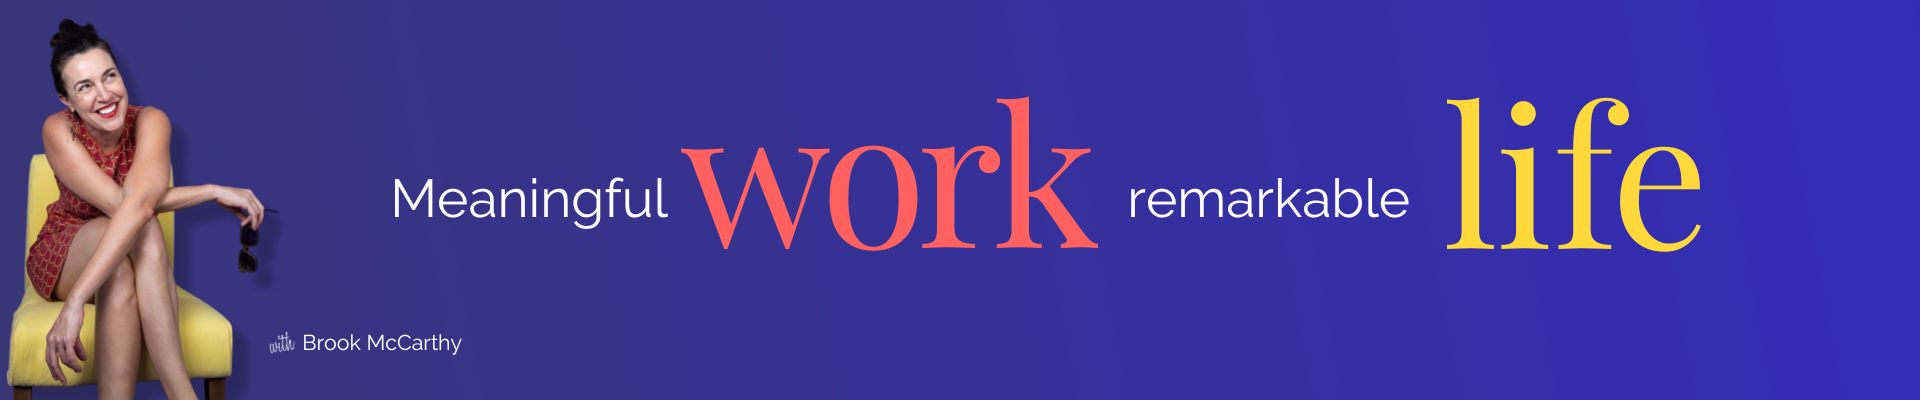 meaningful work podcast